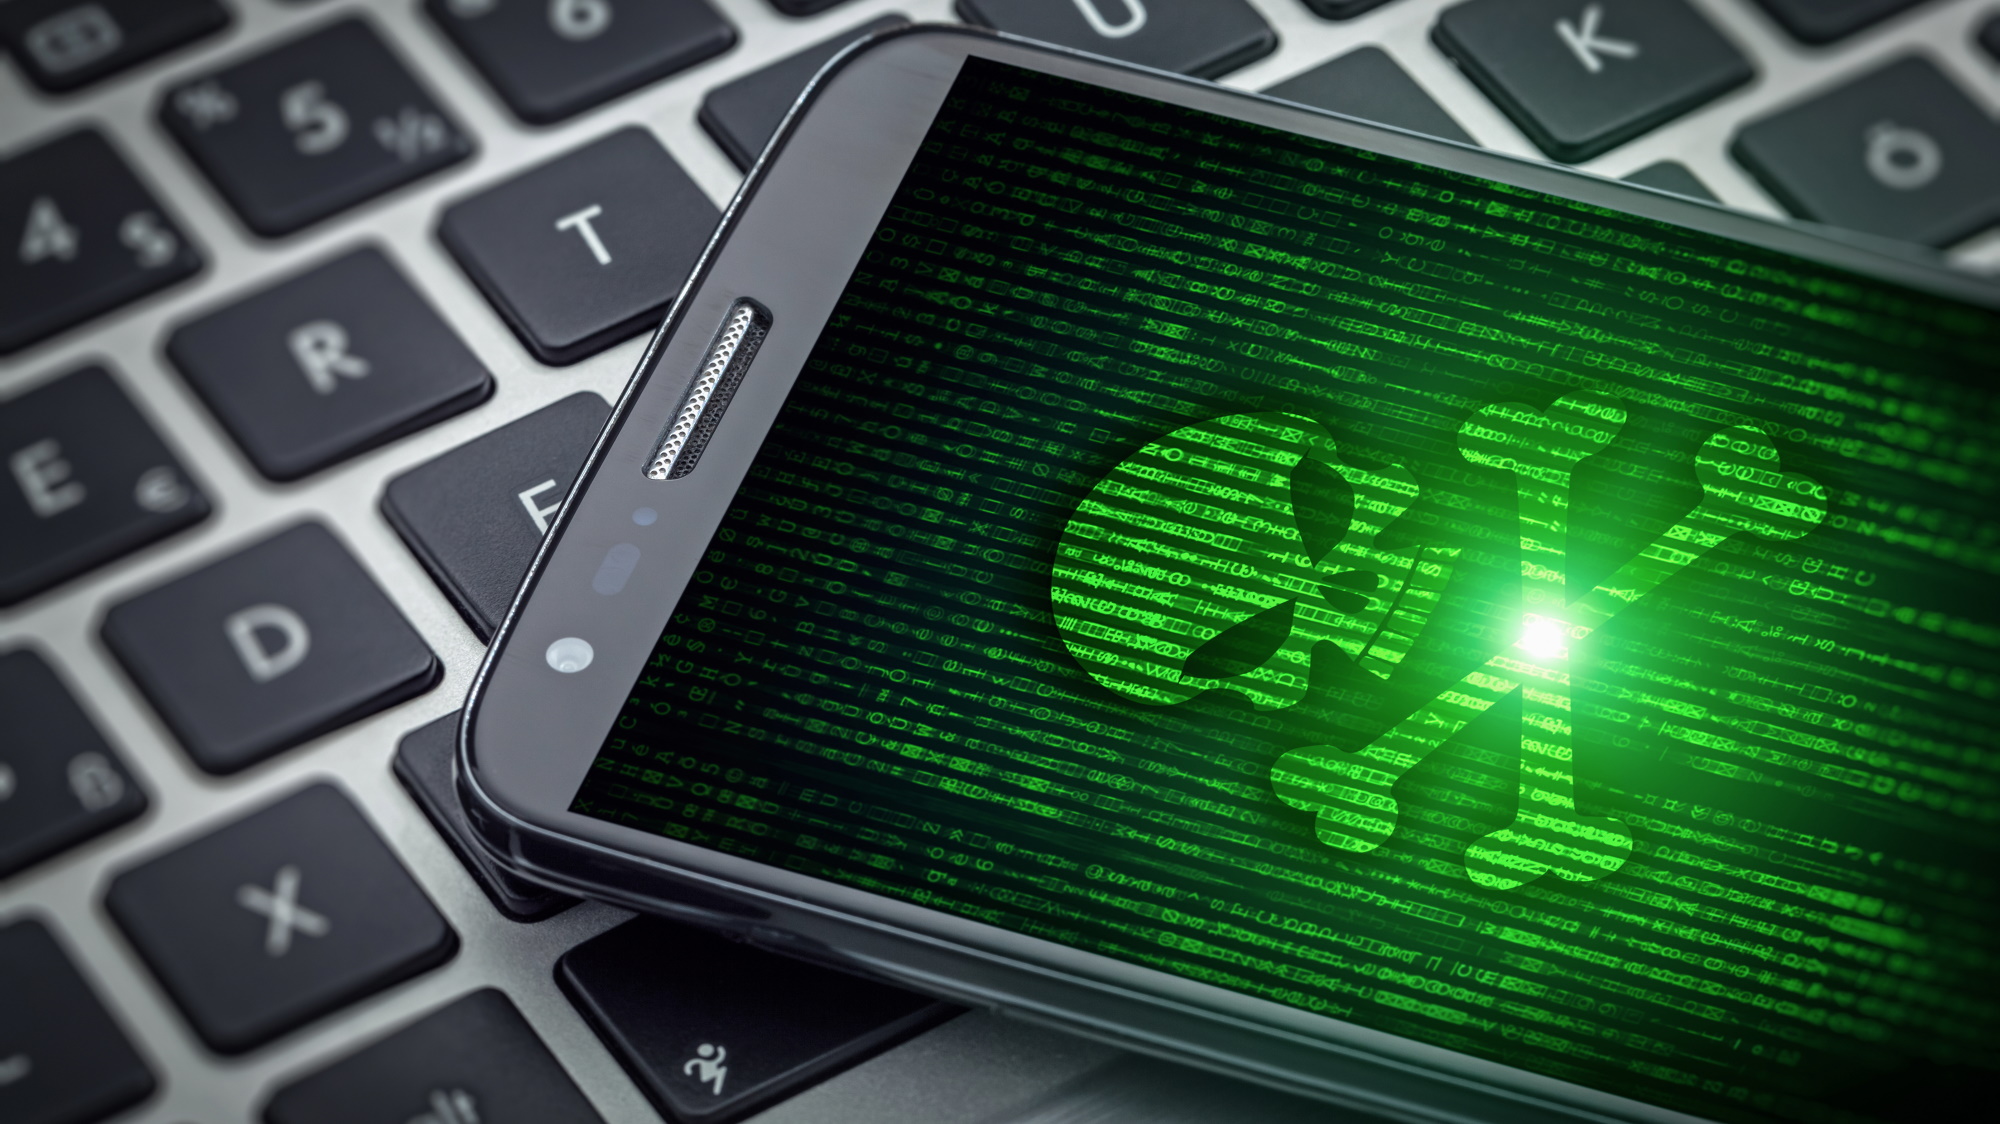 Watch out – This new malware can add hundreds to your phone bill